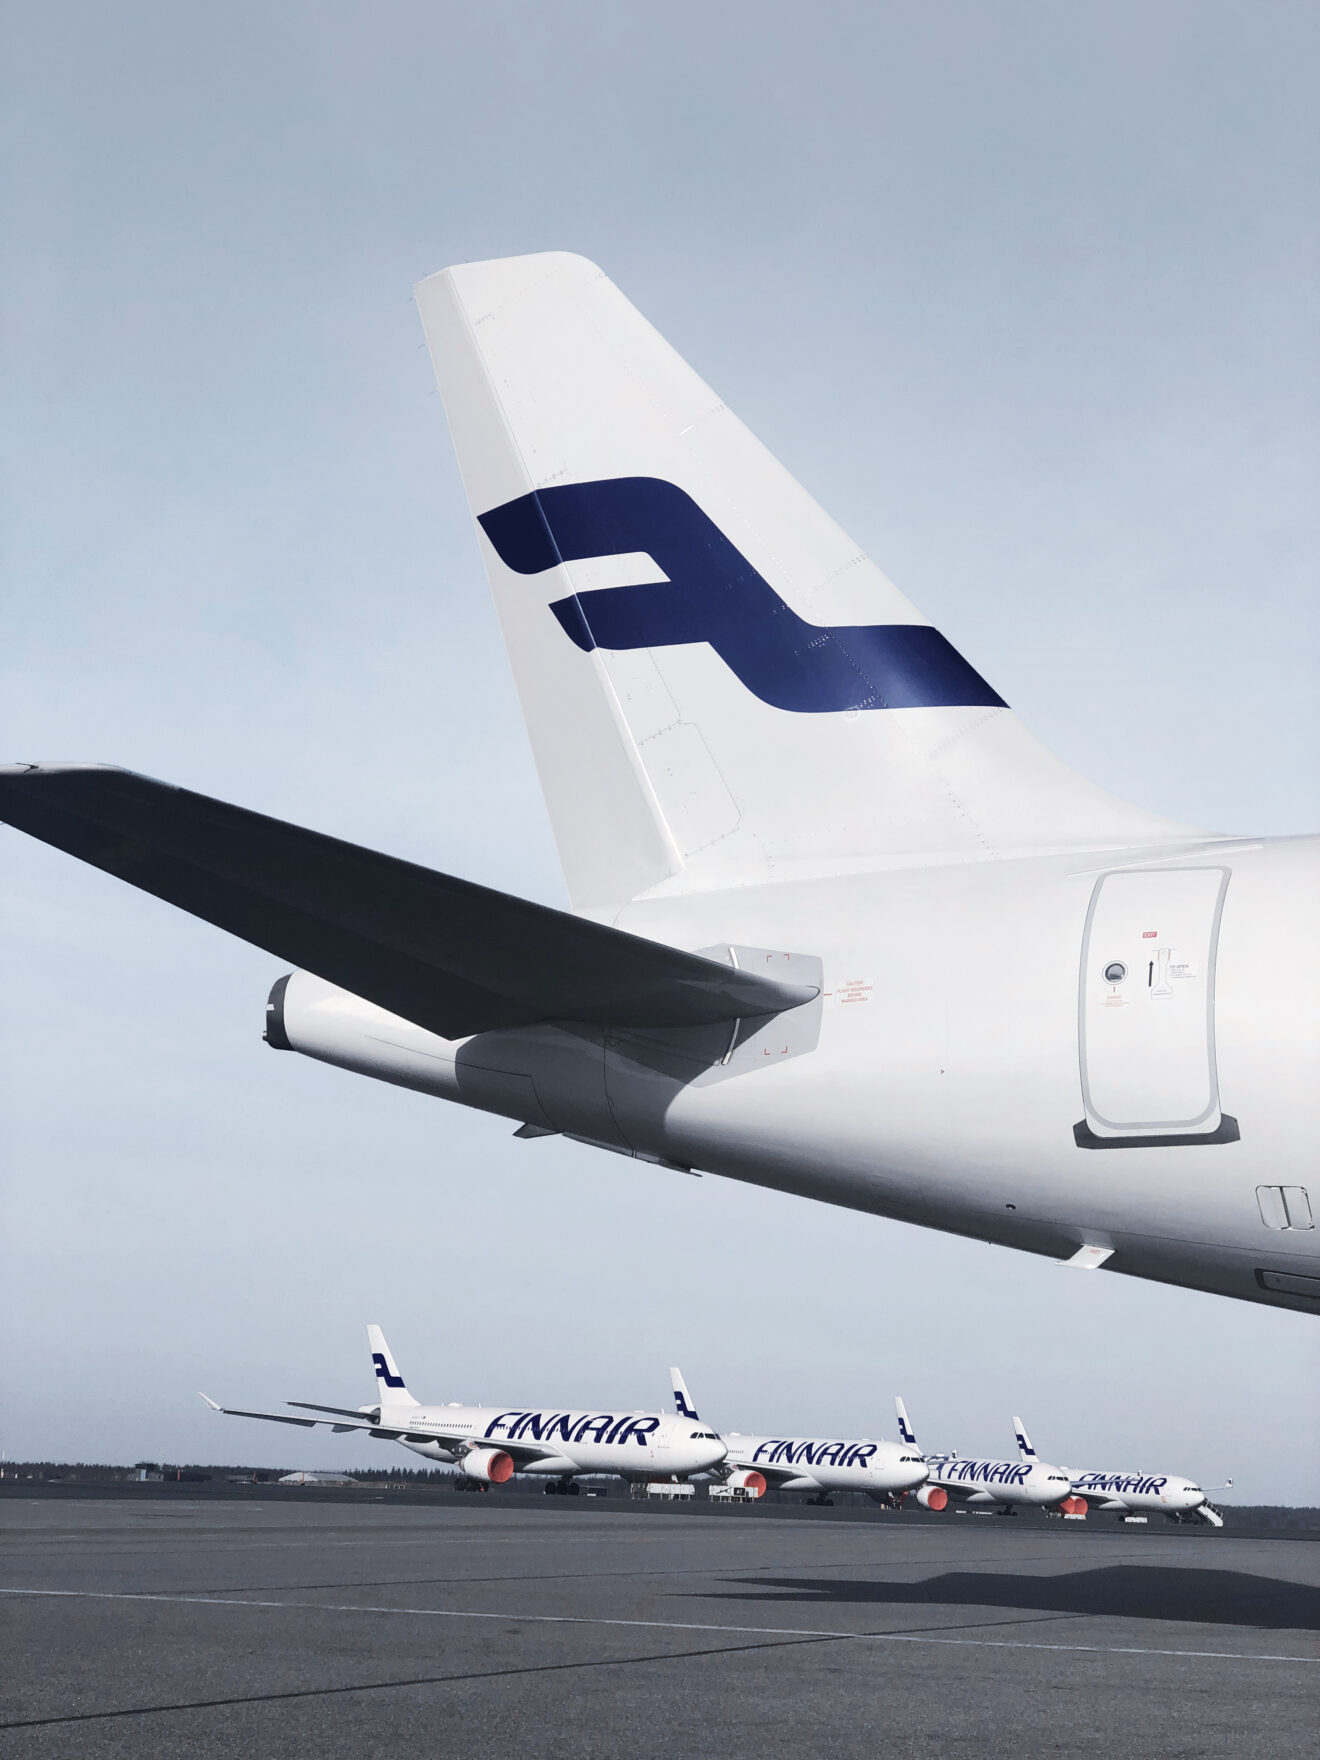 Finnair is looking for a new CEO to replace Topi Manner who gave notice of his resignation